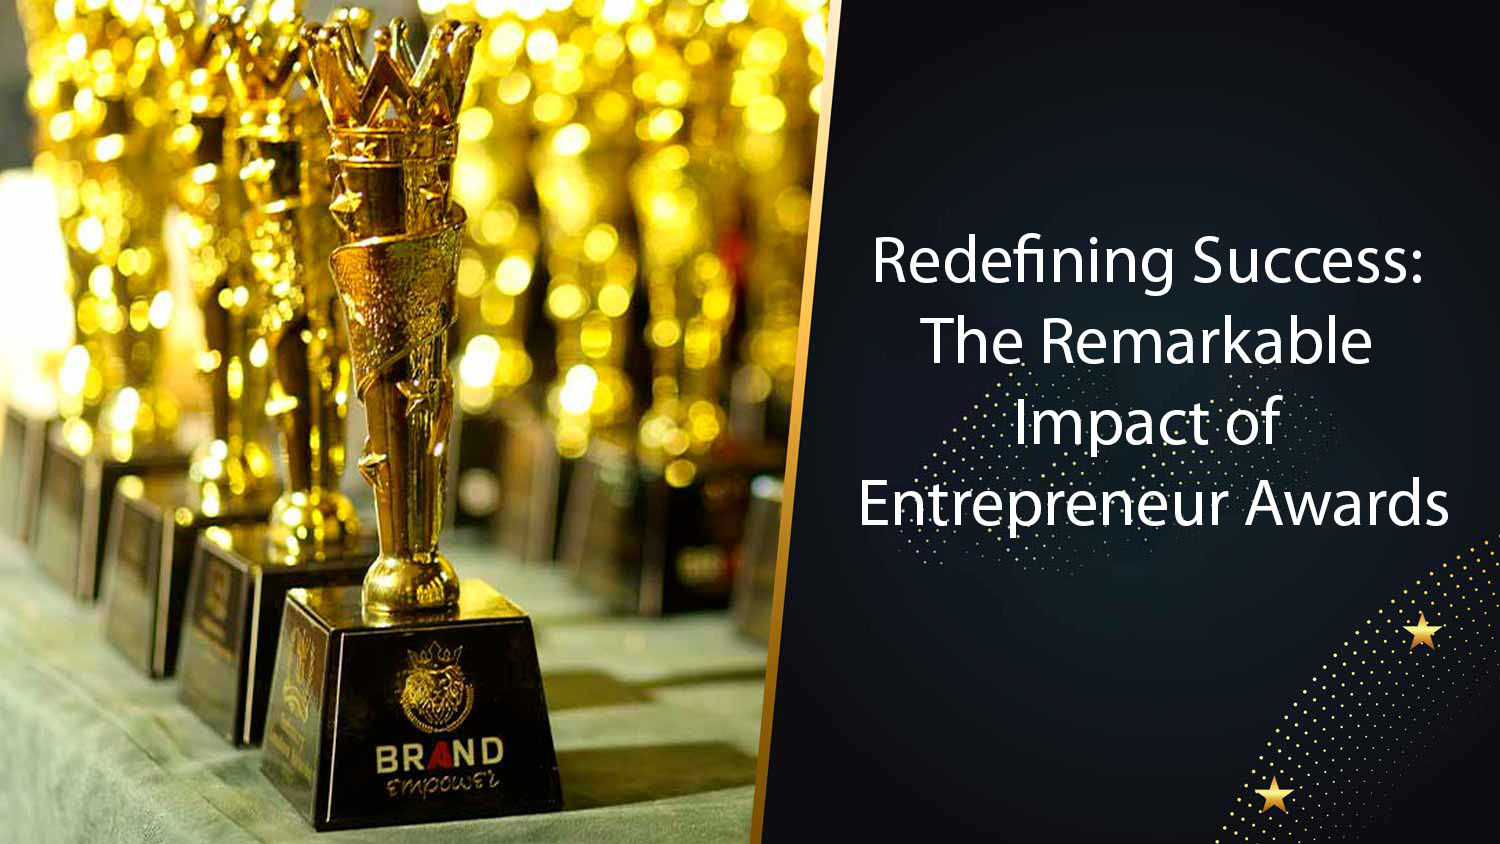 Redefining Success The Remarkable Impact of Entrepreneur Awards